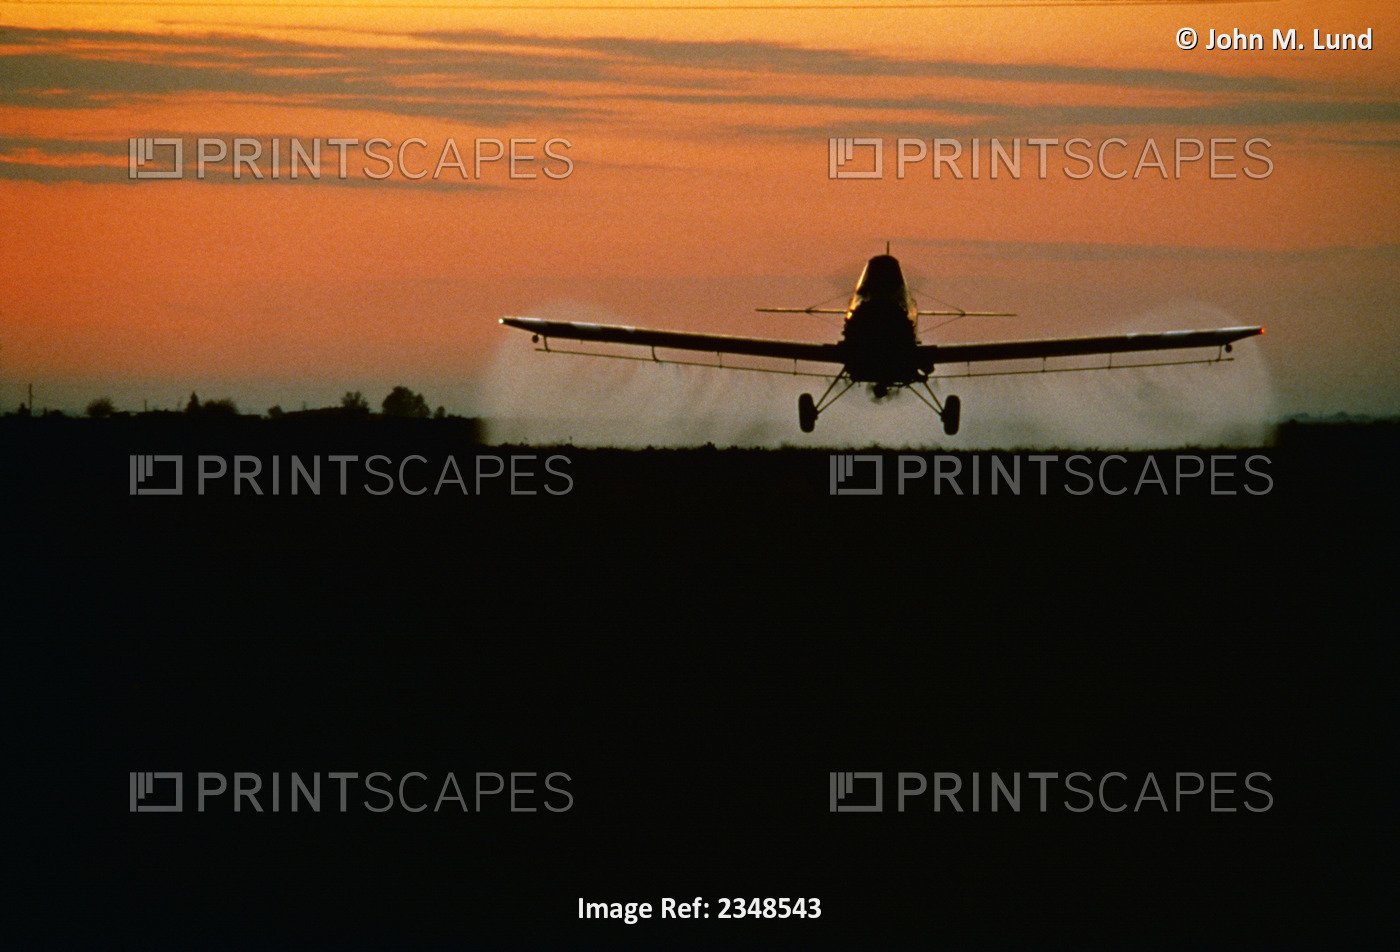 Agriculture - Crop Dusting, Fixed single wing aircraft, sunset / San Joaquin ...